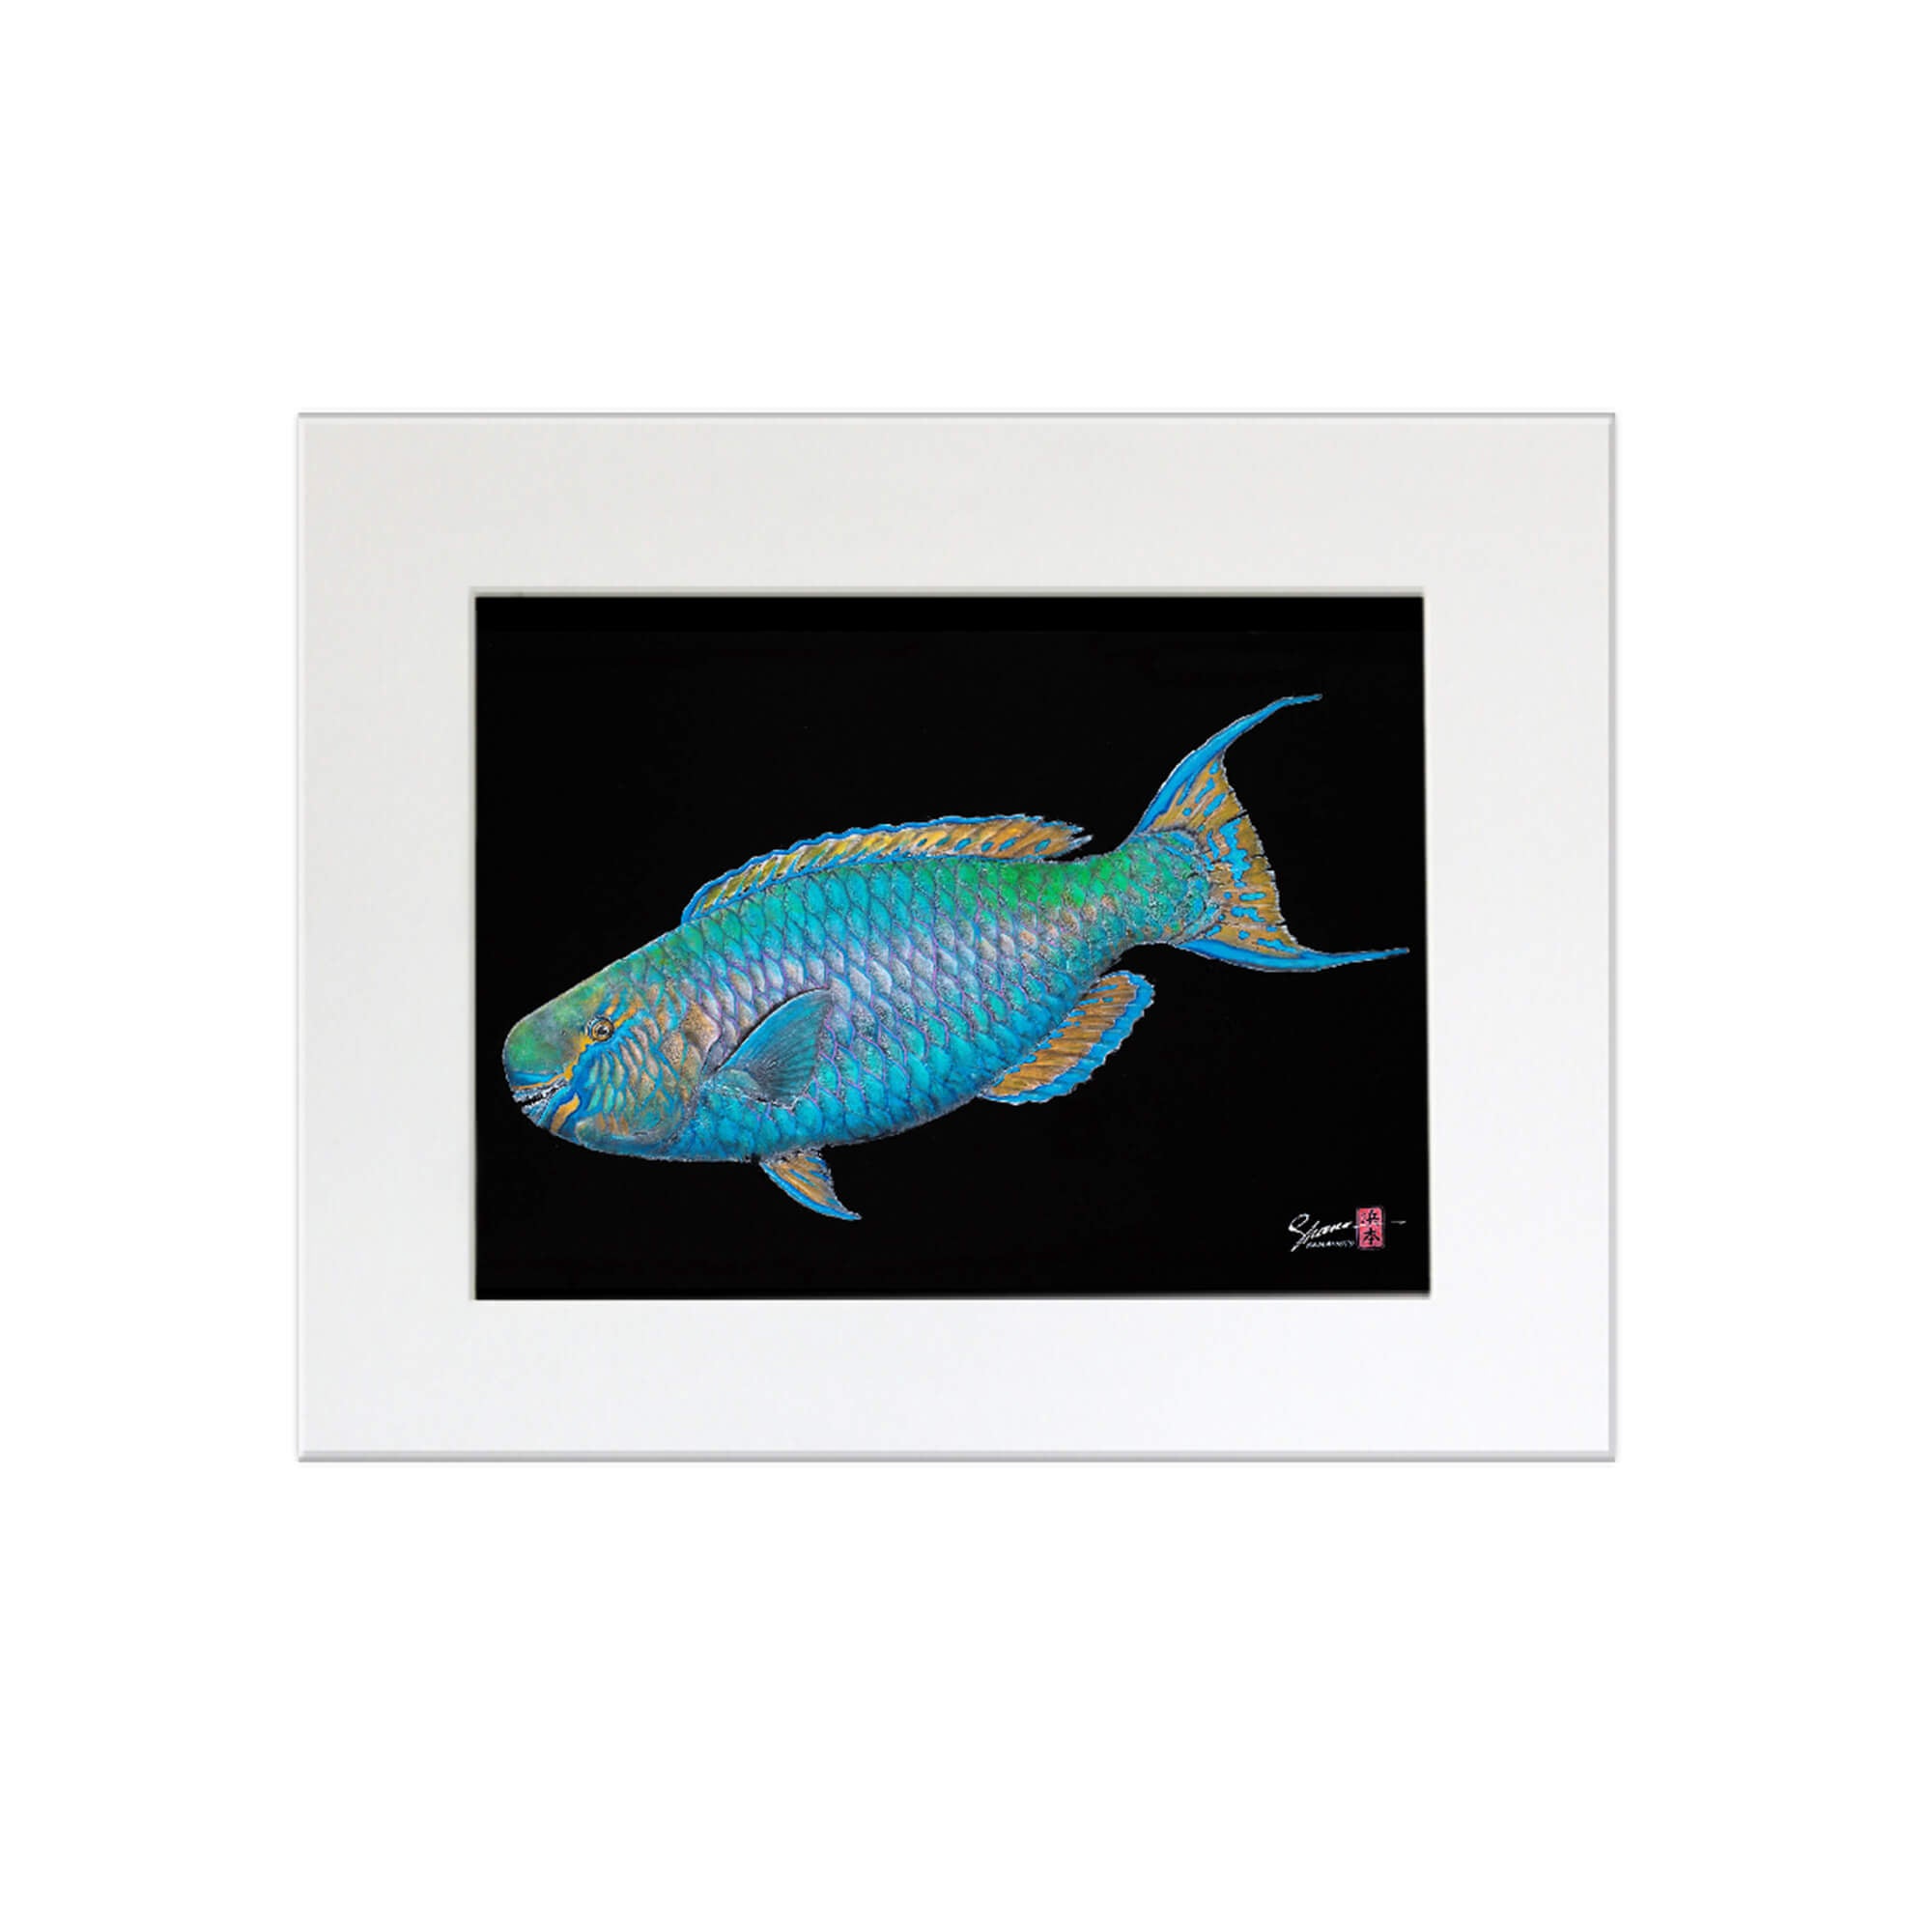 Matted print of Uhu (also known as Parrot Fish) by Hawaii gyotaku artist Shane Hamamoto